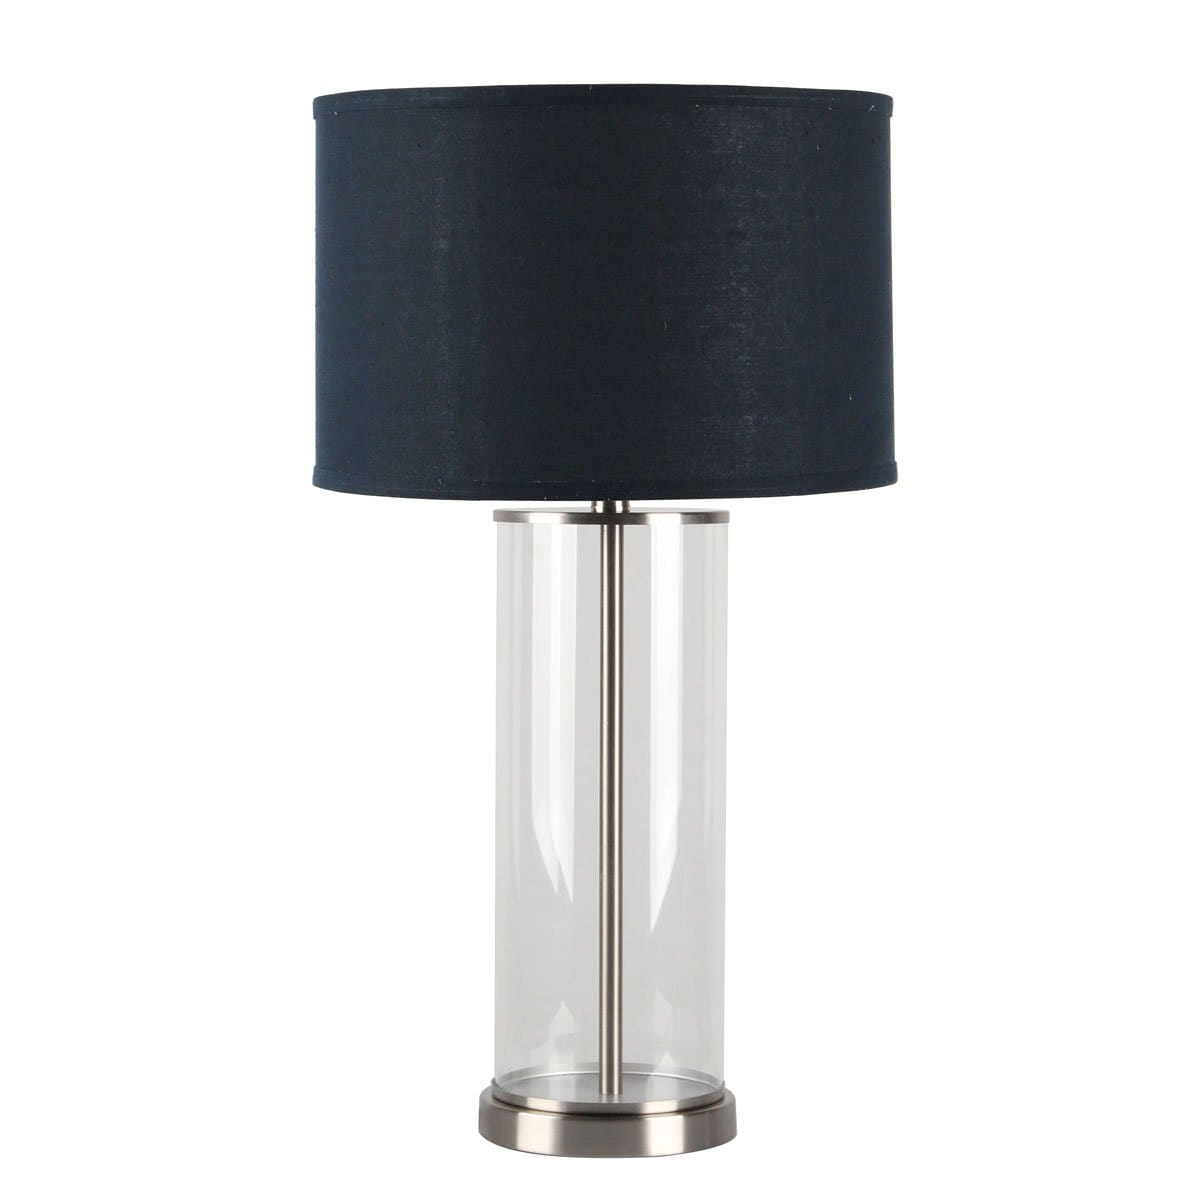 CAFE LIGHTING & LIVING Table Lamp Left Bank Table Lamp - Nickel w Navy Shade B12266